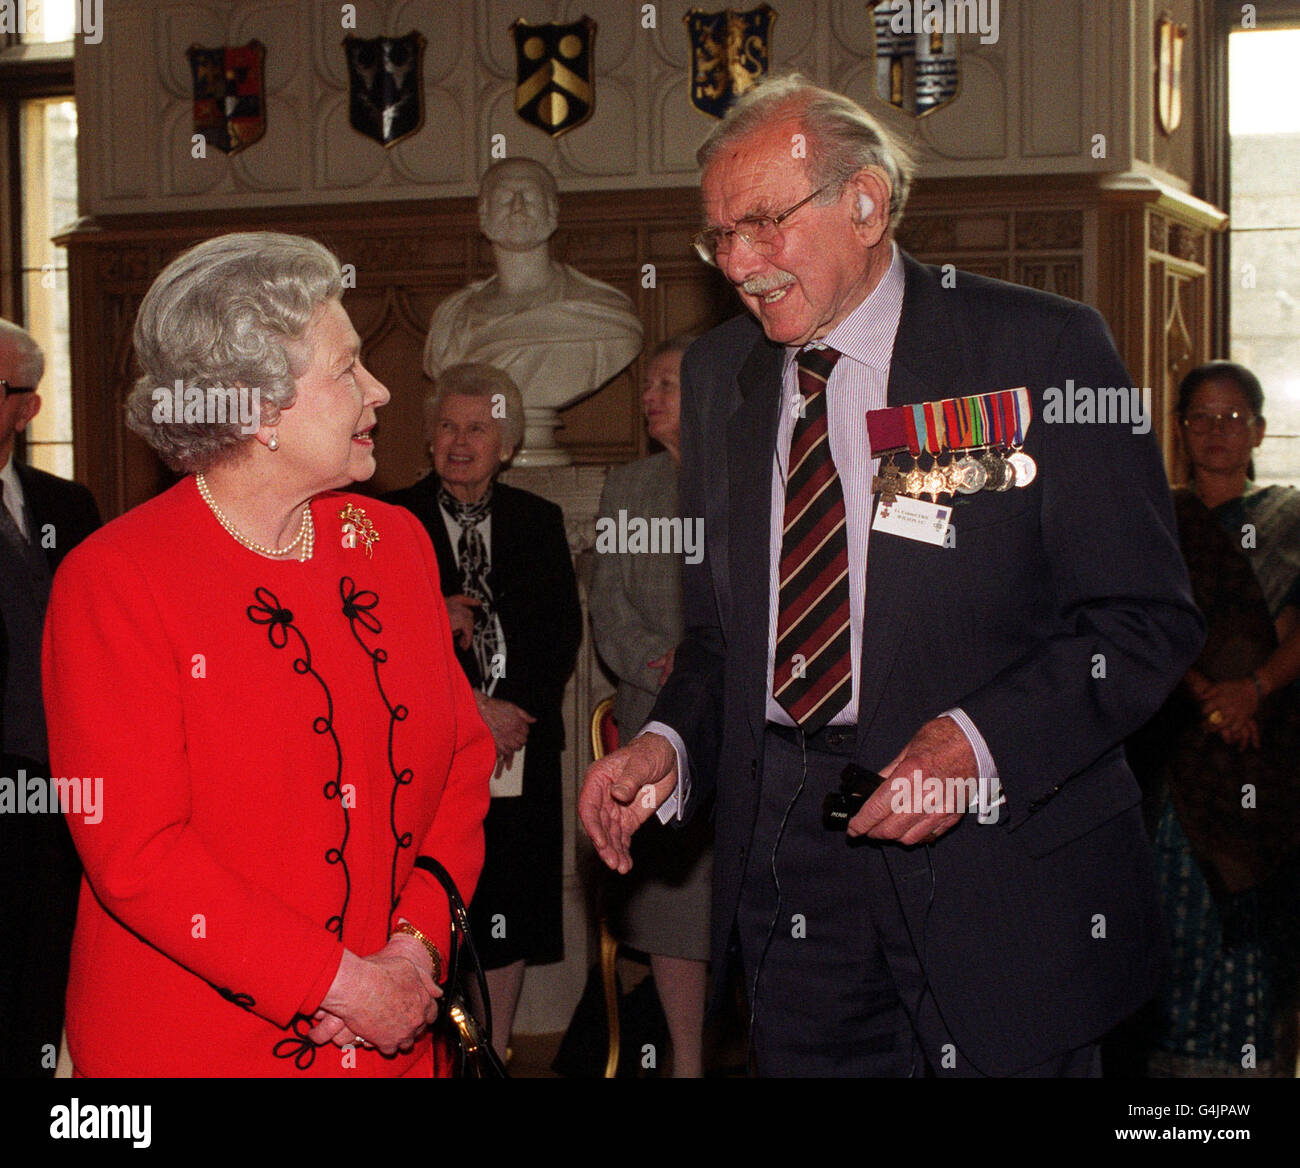 The Queen welcomed war heroes to Windsor Castle. Her Majesty met Victoria Cross veteran Captain Eric Wilson who was awarded a VC for gallantry, fighting to the last, commanding machine-gun posts in Somaliland during the Second World War. Stock Photo